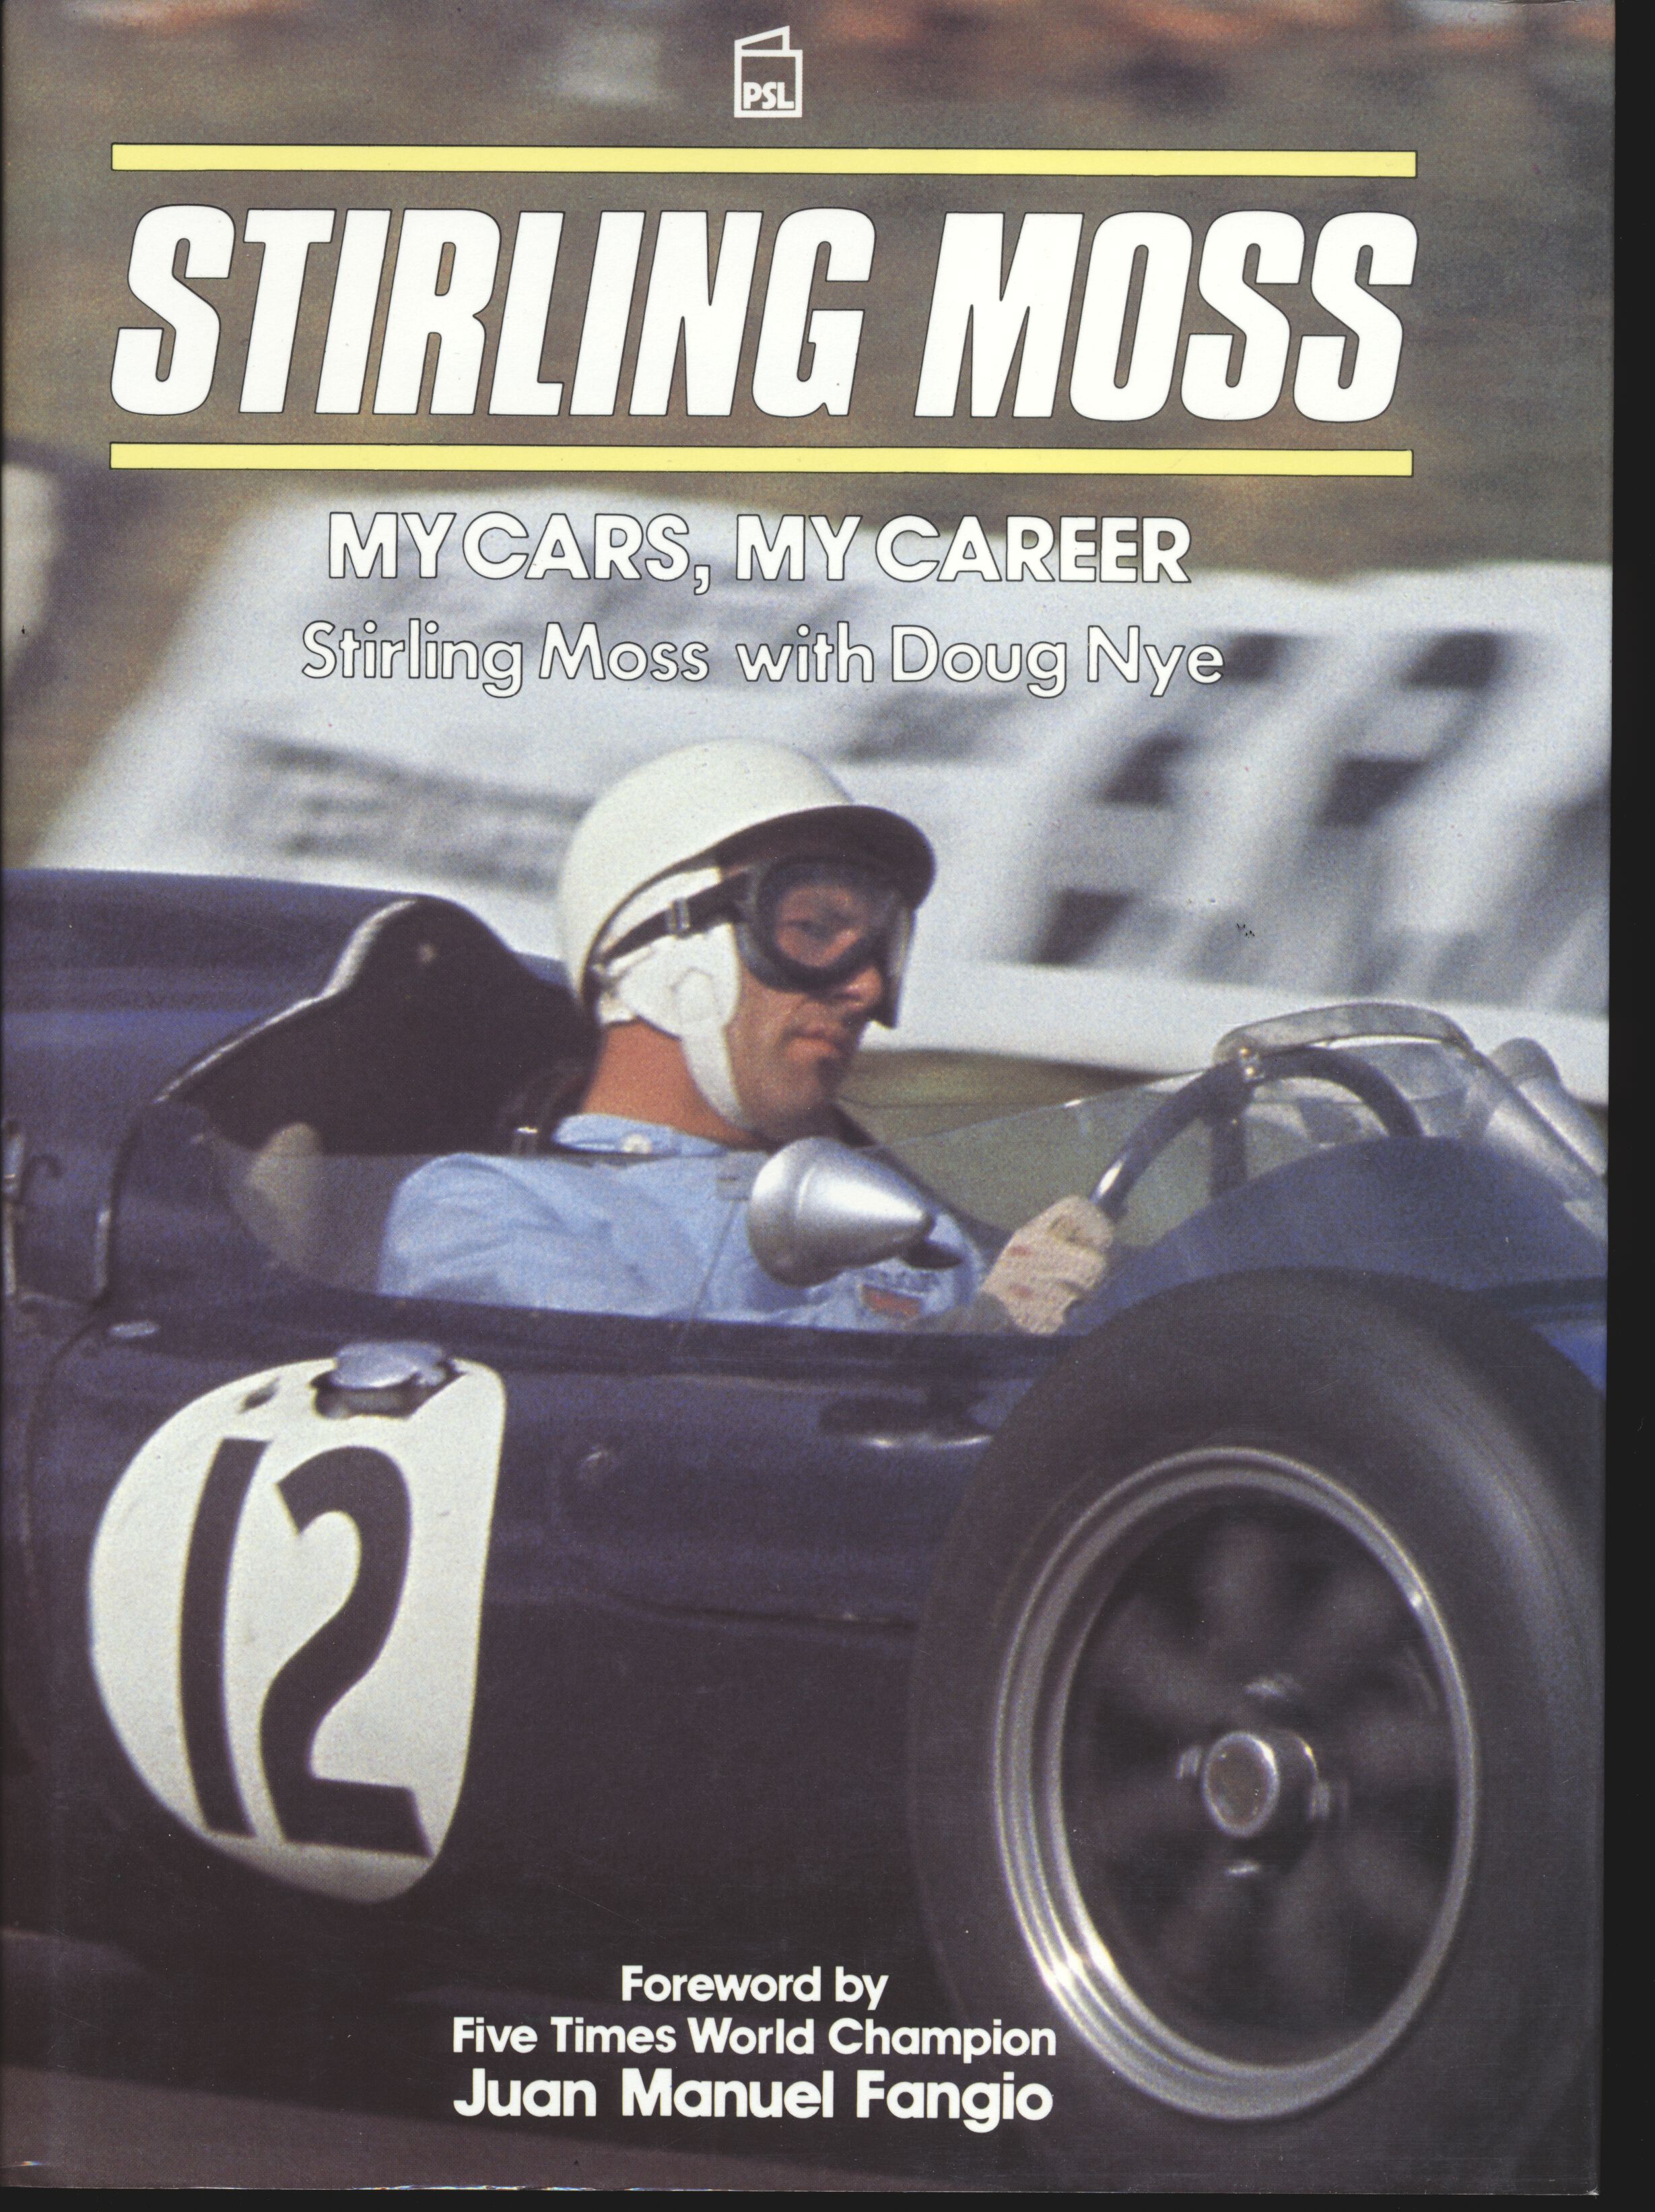 Stirling Moss - My Cars, My Career - Stirling Moss and Doug Nye